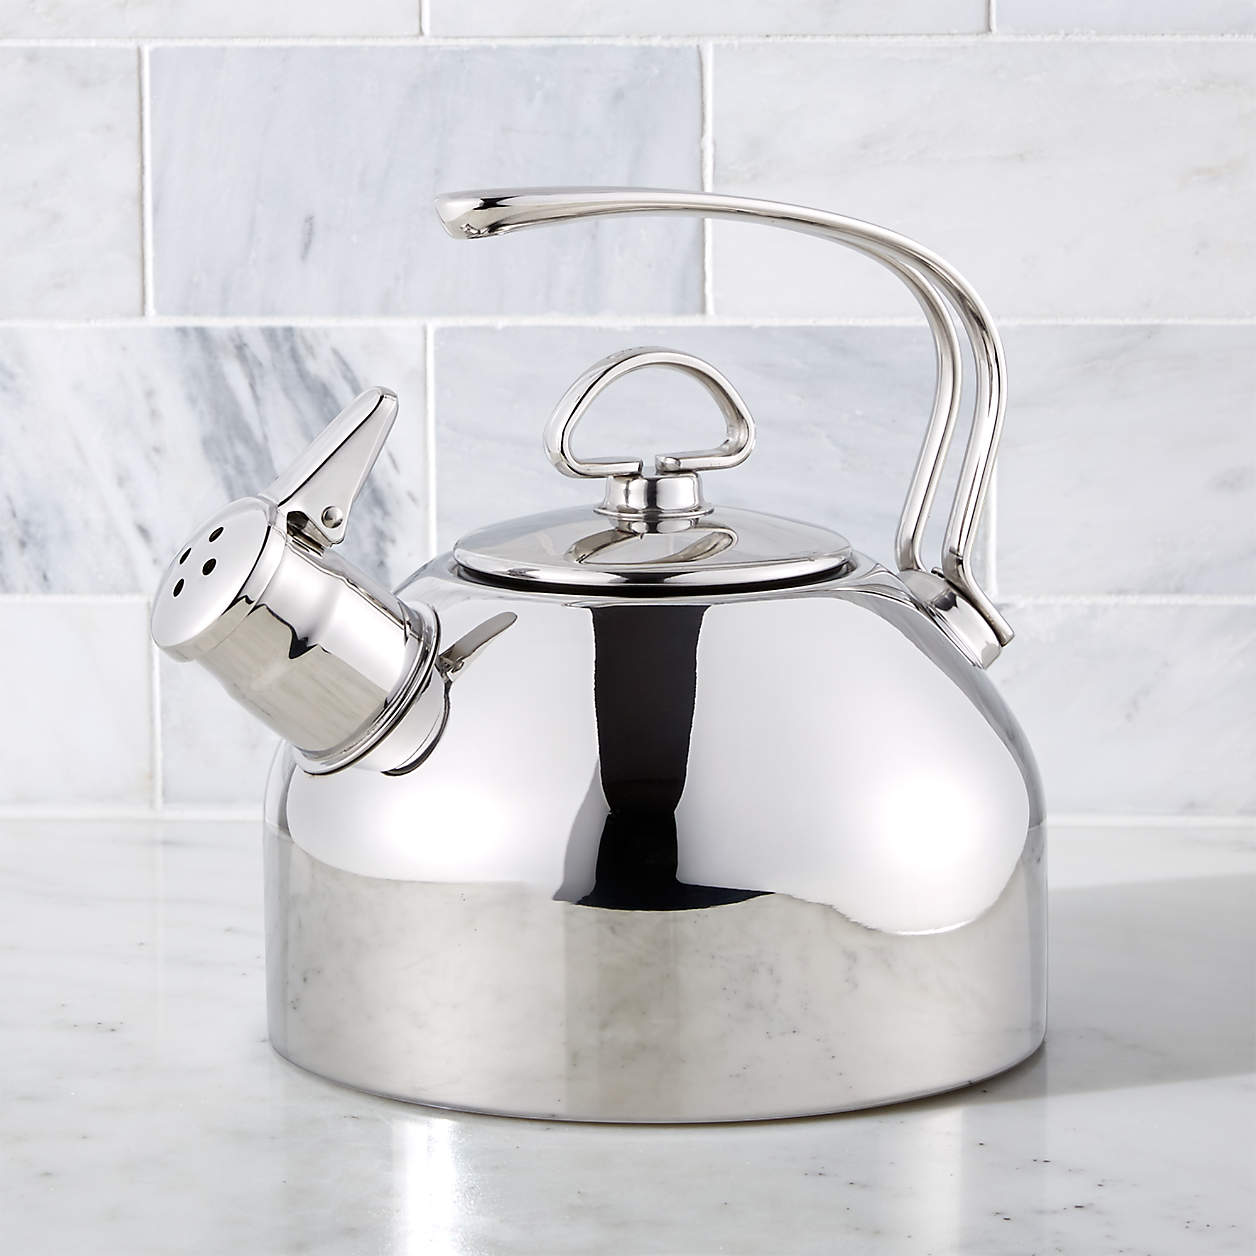 Chantal Classic Stainless Steel Whistling Tea Kettle + Reviews | Crate Chantal Stainless Steel Tea Kettle